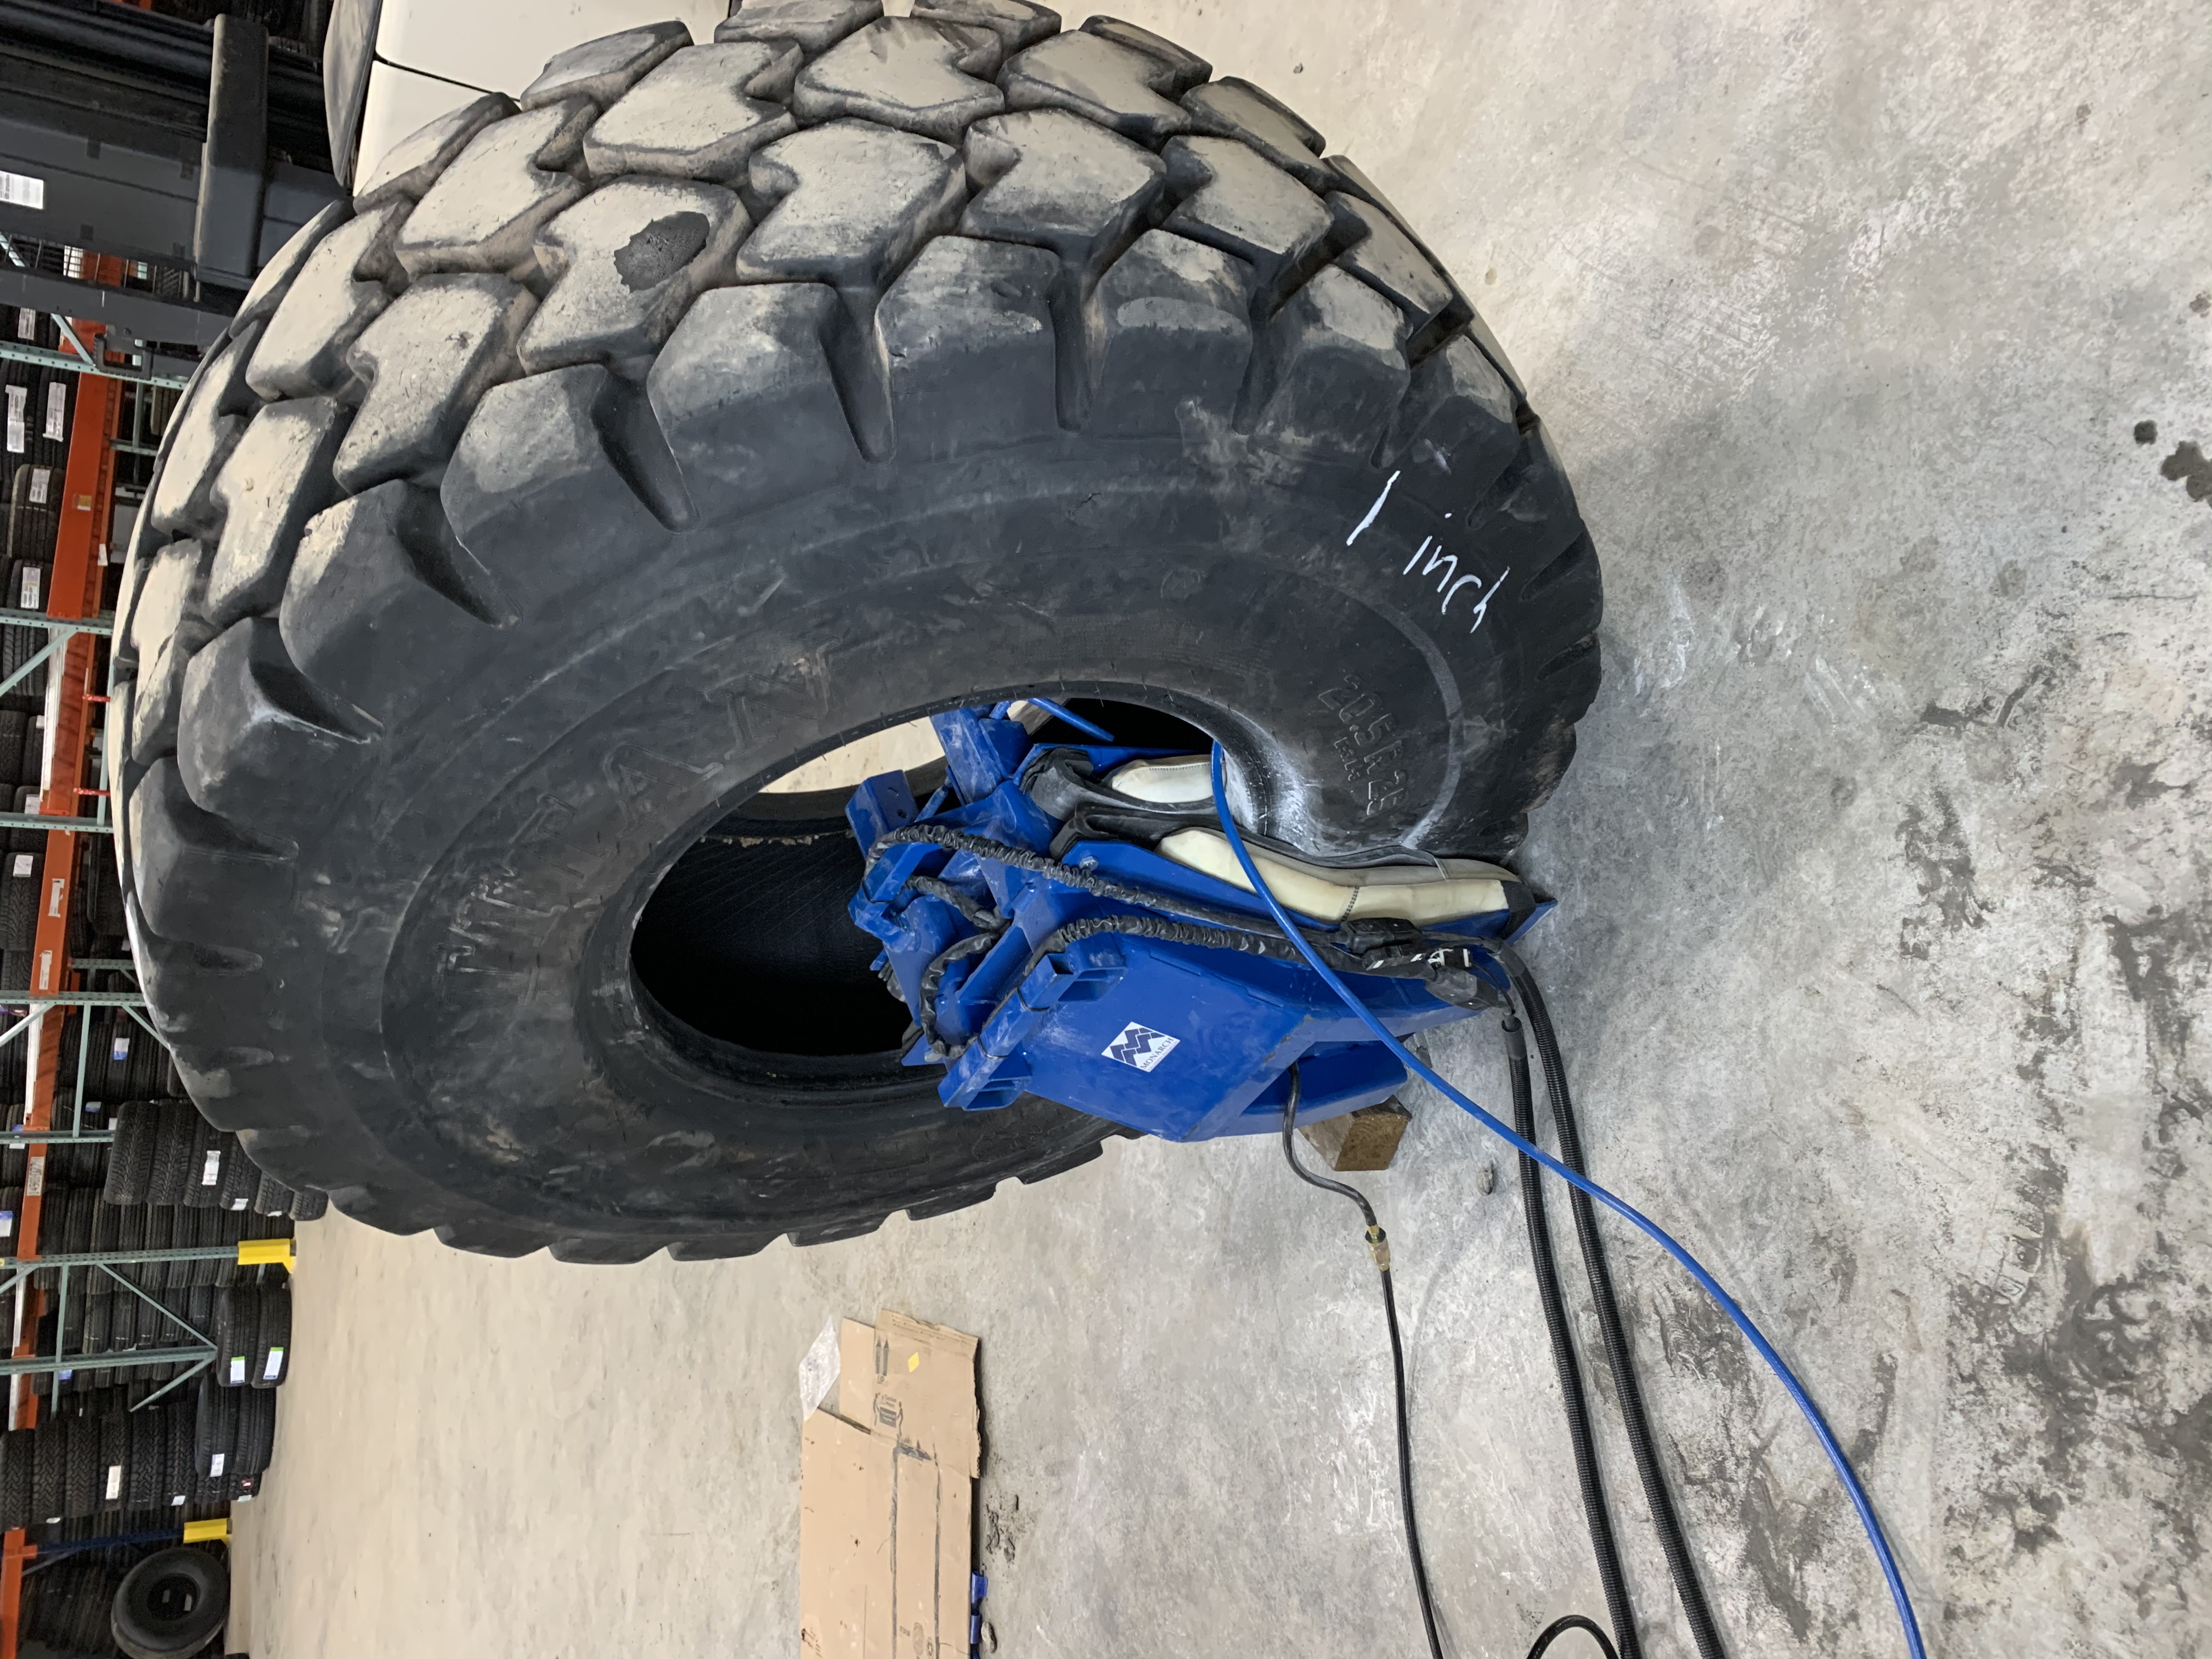 sectional repair on tires